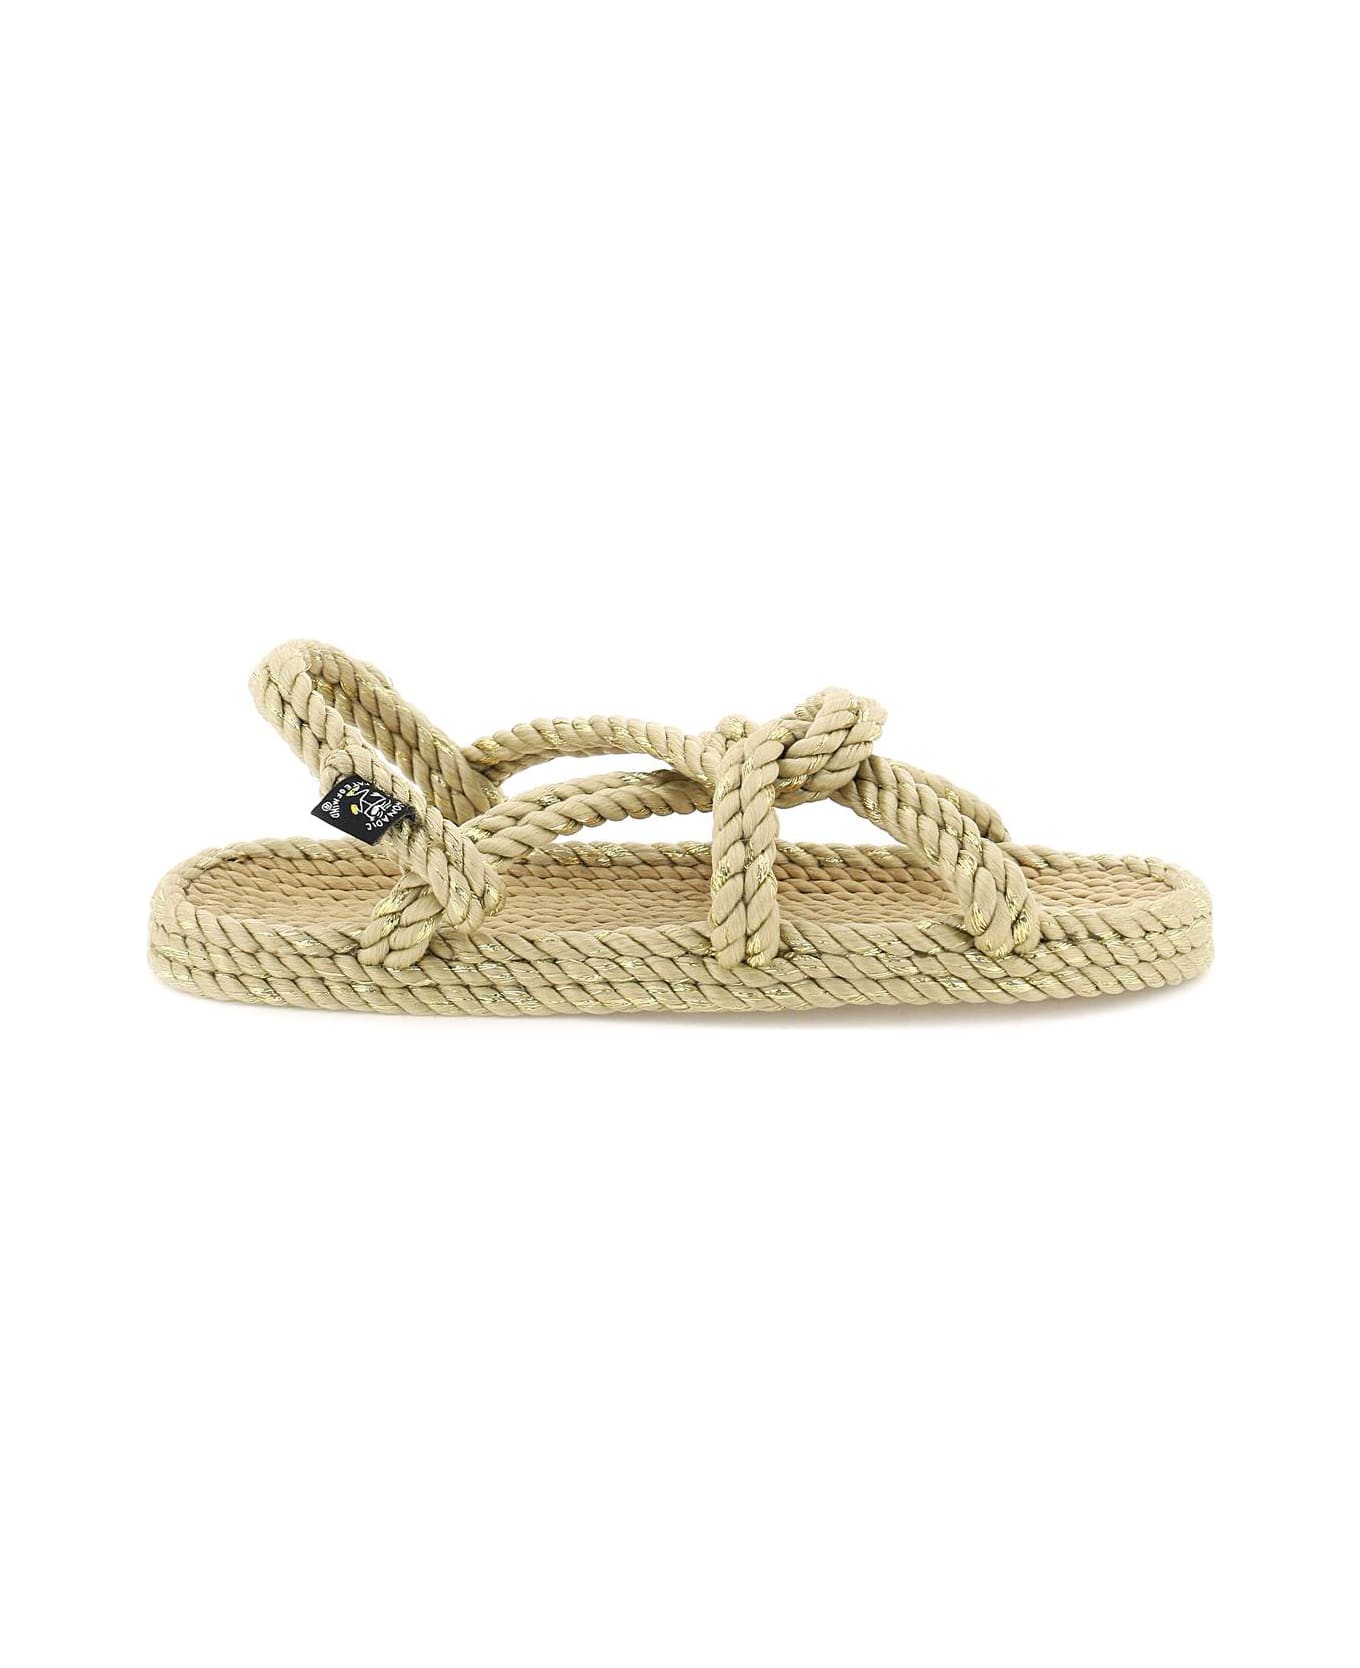 Nomadic State of Mind Mountain Momma S Rope Sandals - BEIGE SPARKLING GOLD (Beige)